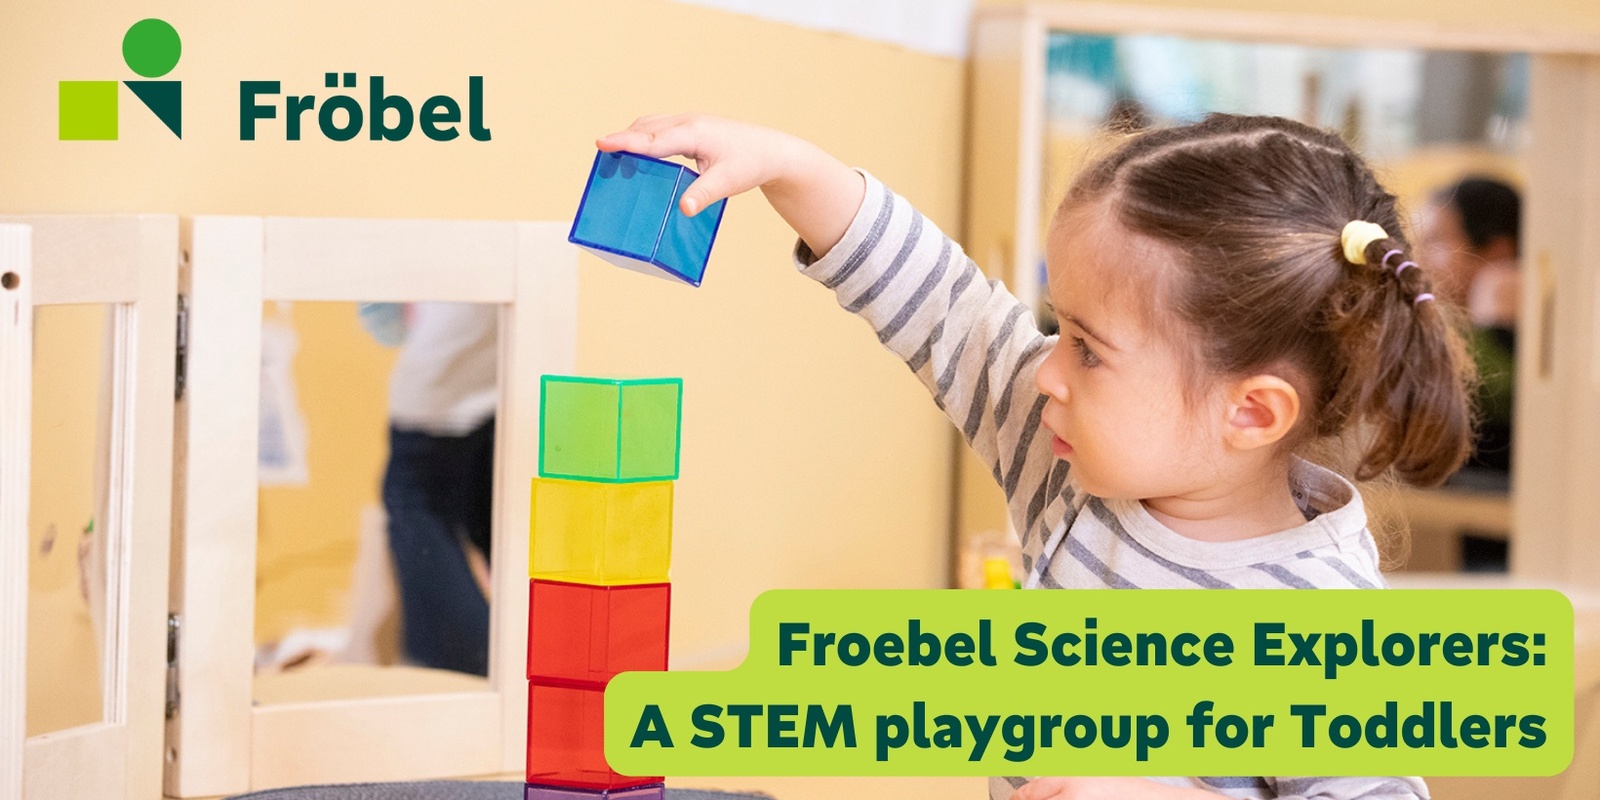 Banner image for Froebel Science Explorers: A STEM playgroup for Toddlers